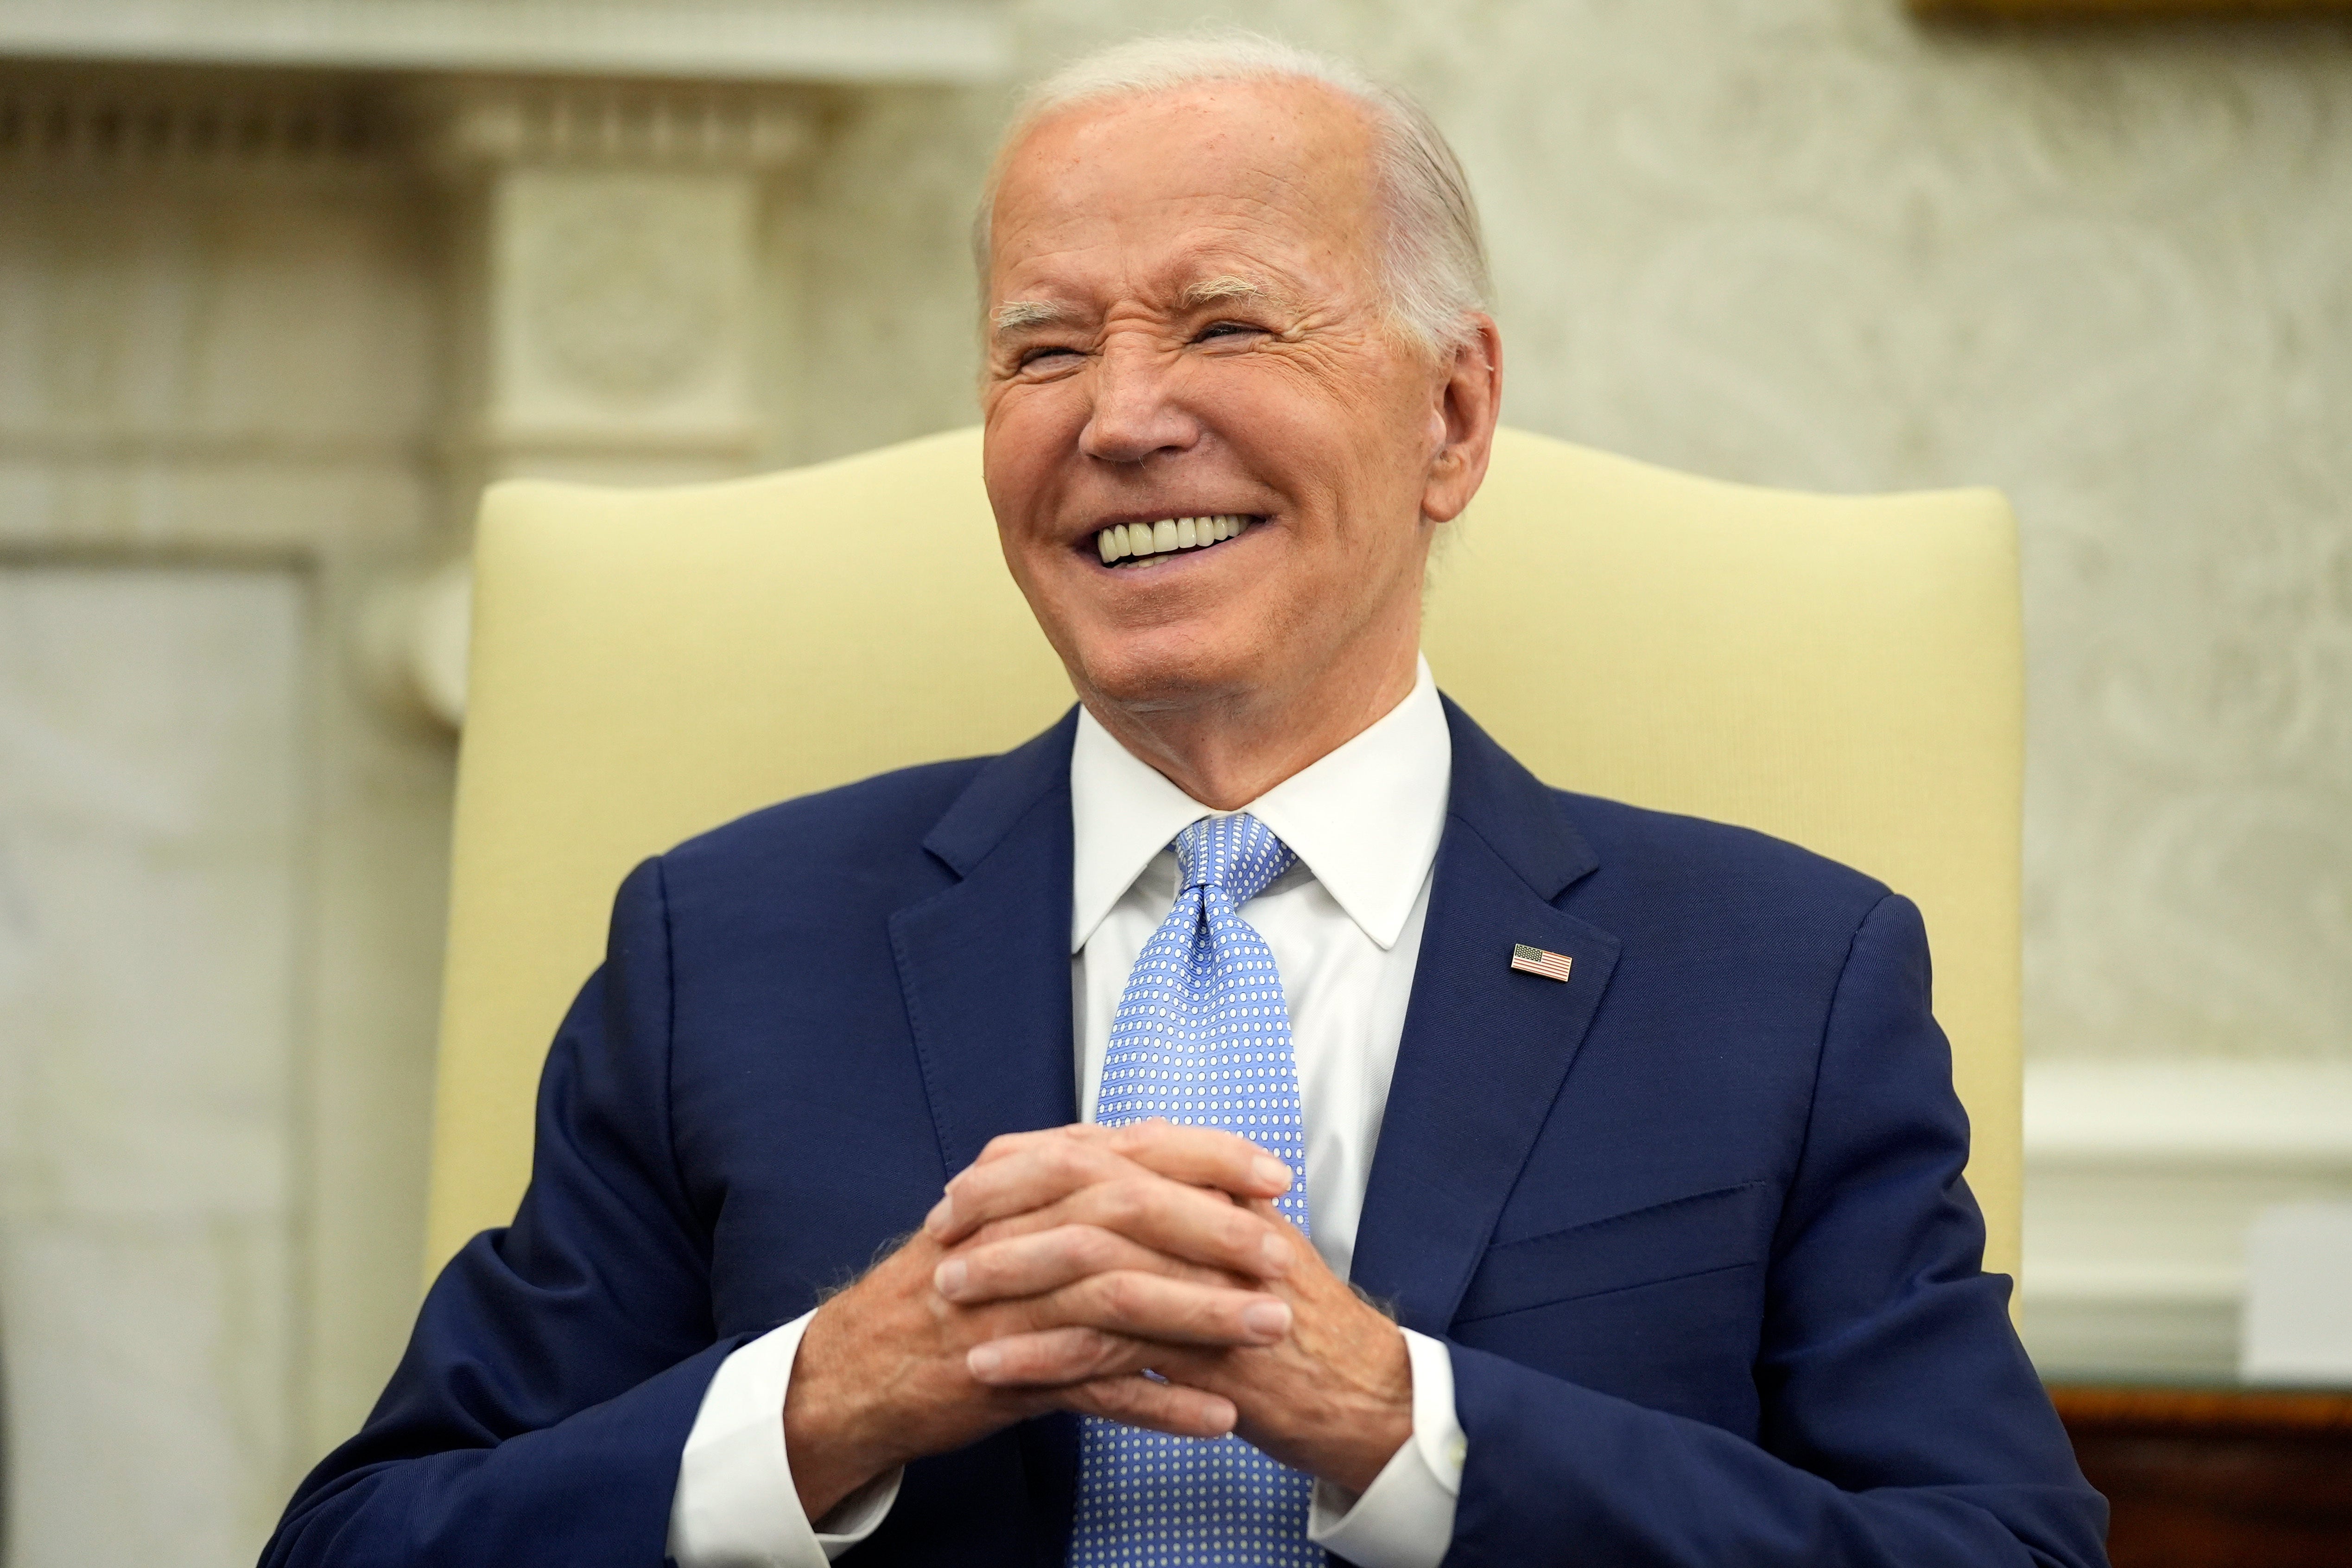 A group of Joe Biden’s closest aides are mulling how to convince him to exit the presidential race